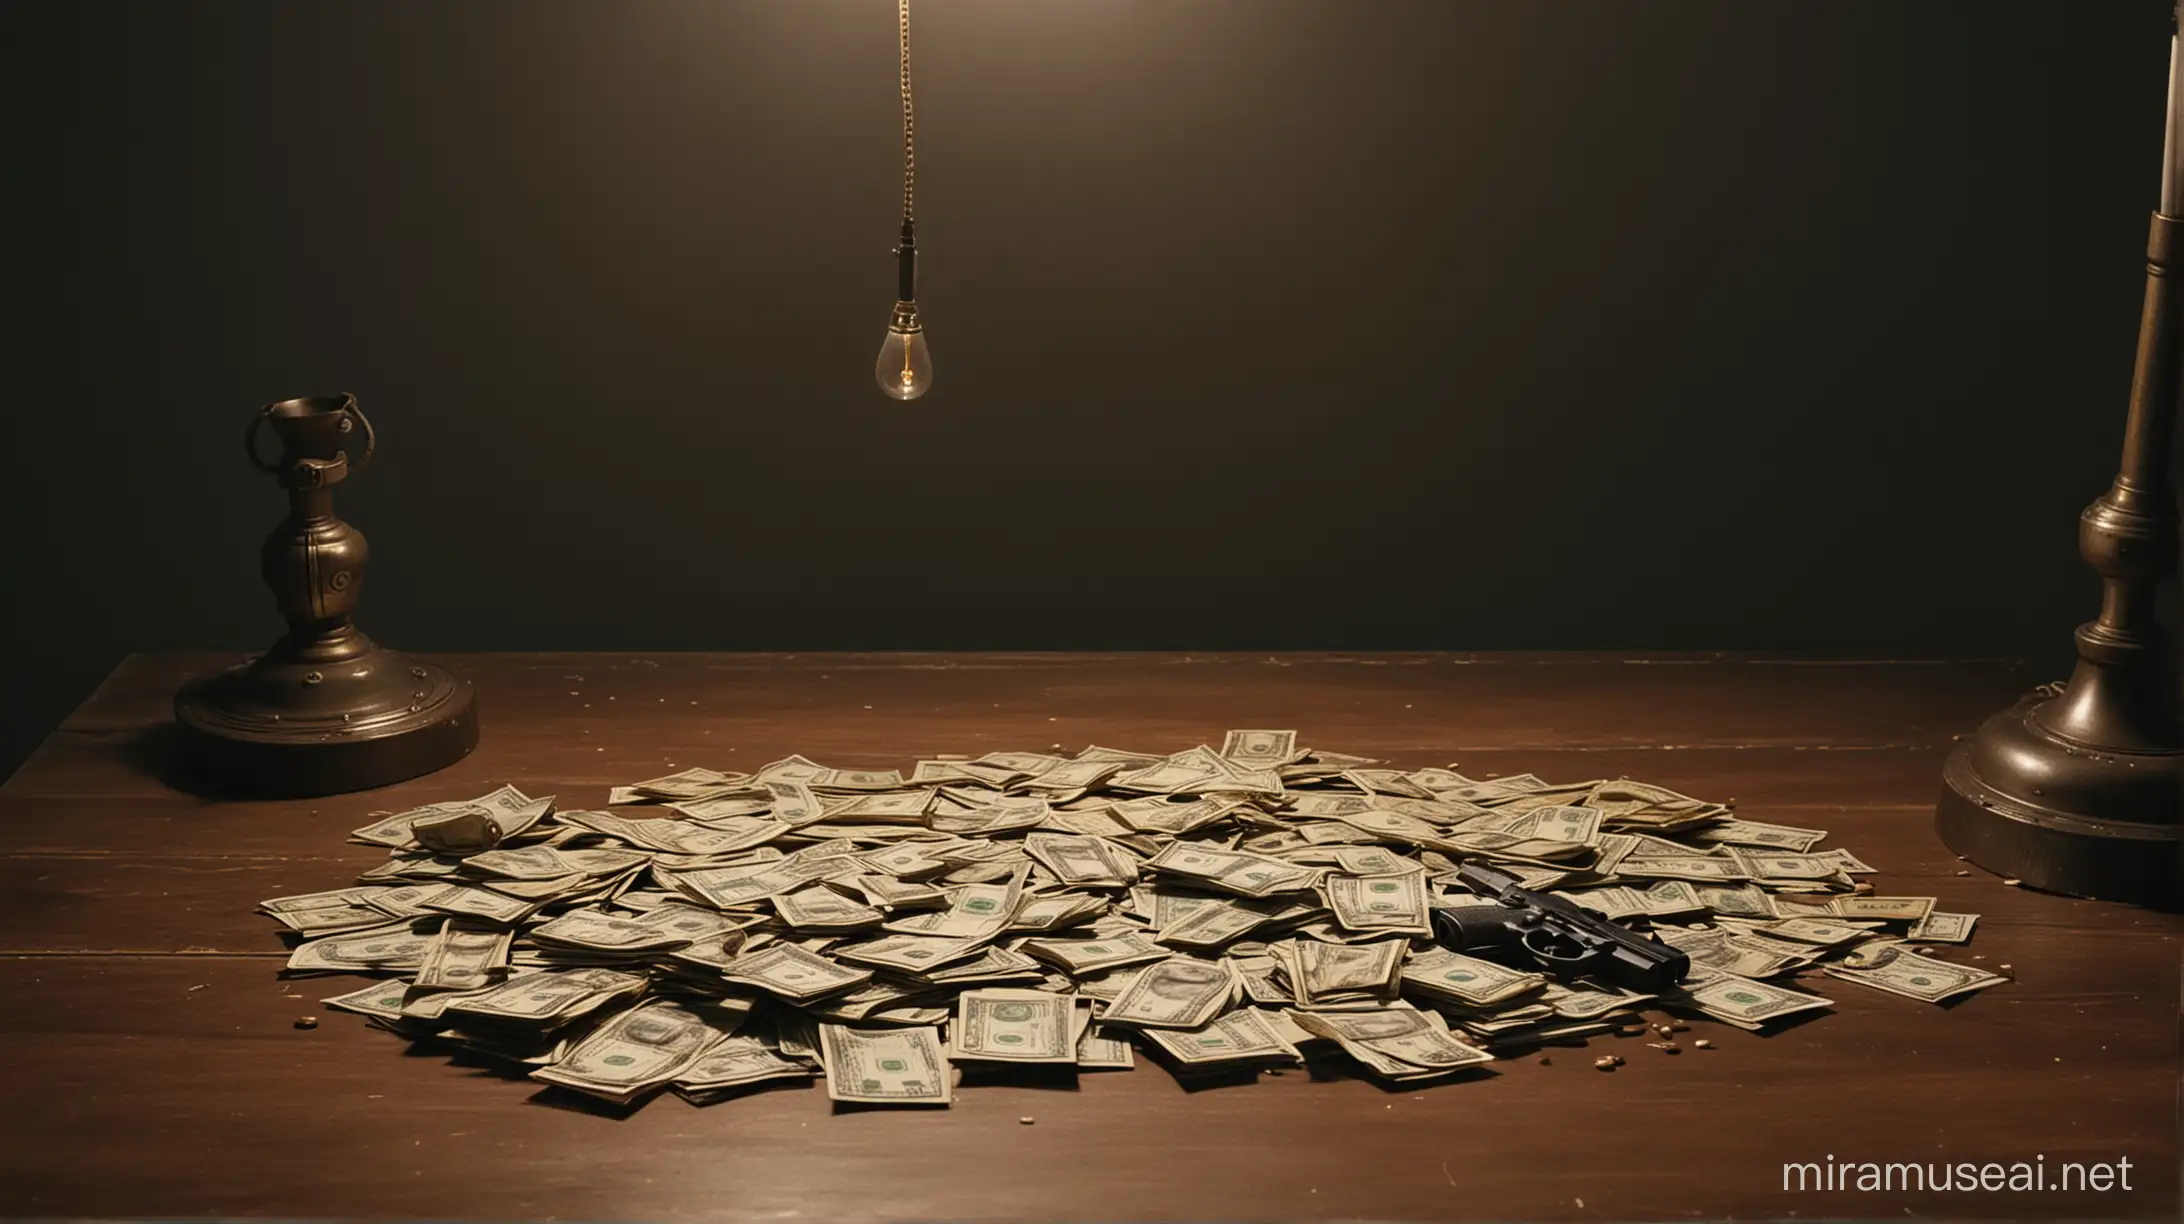 Dimly Lit Wooden Table with Cash and Guns Under a Hanging Lamp